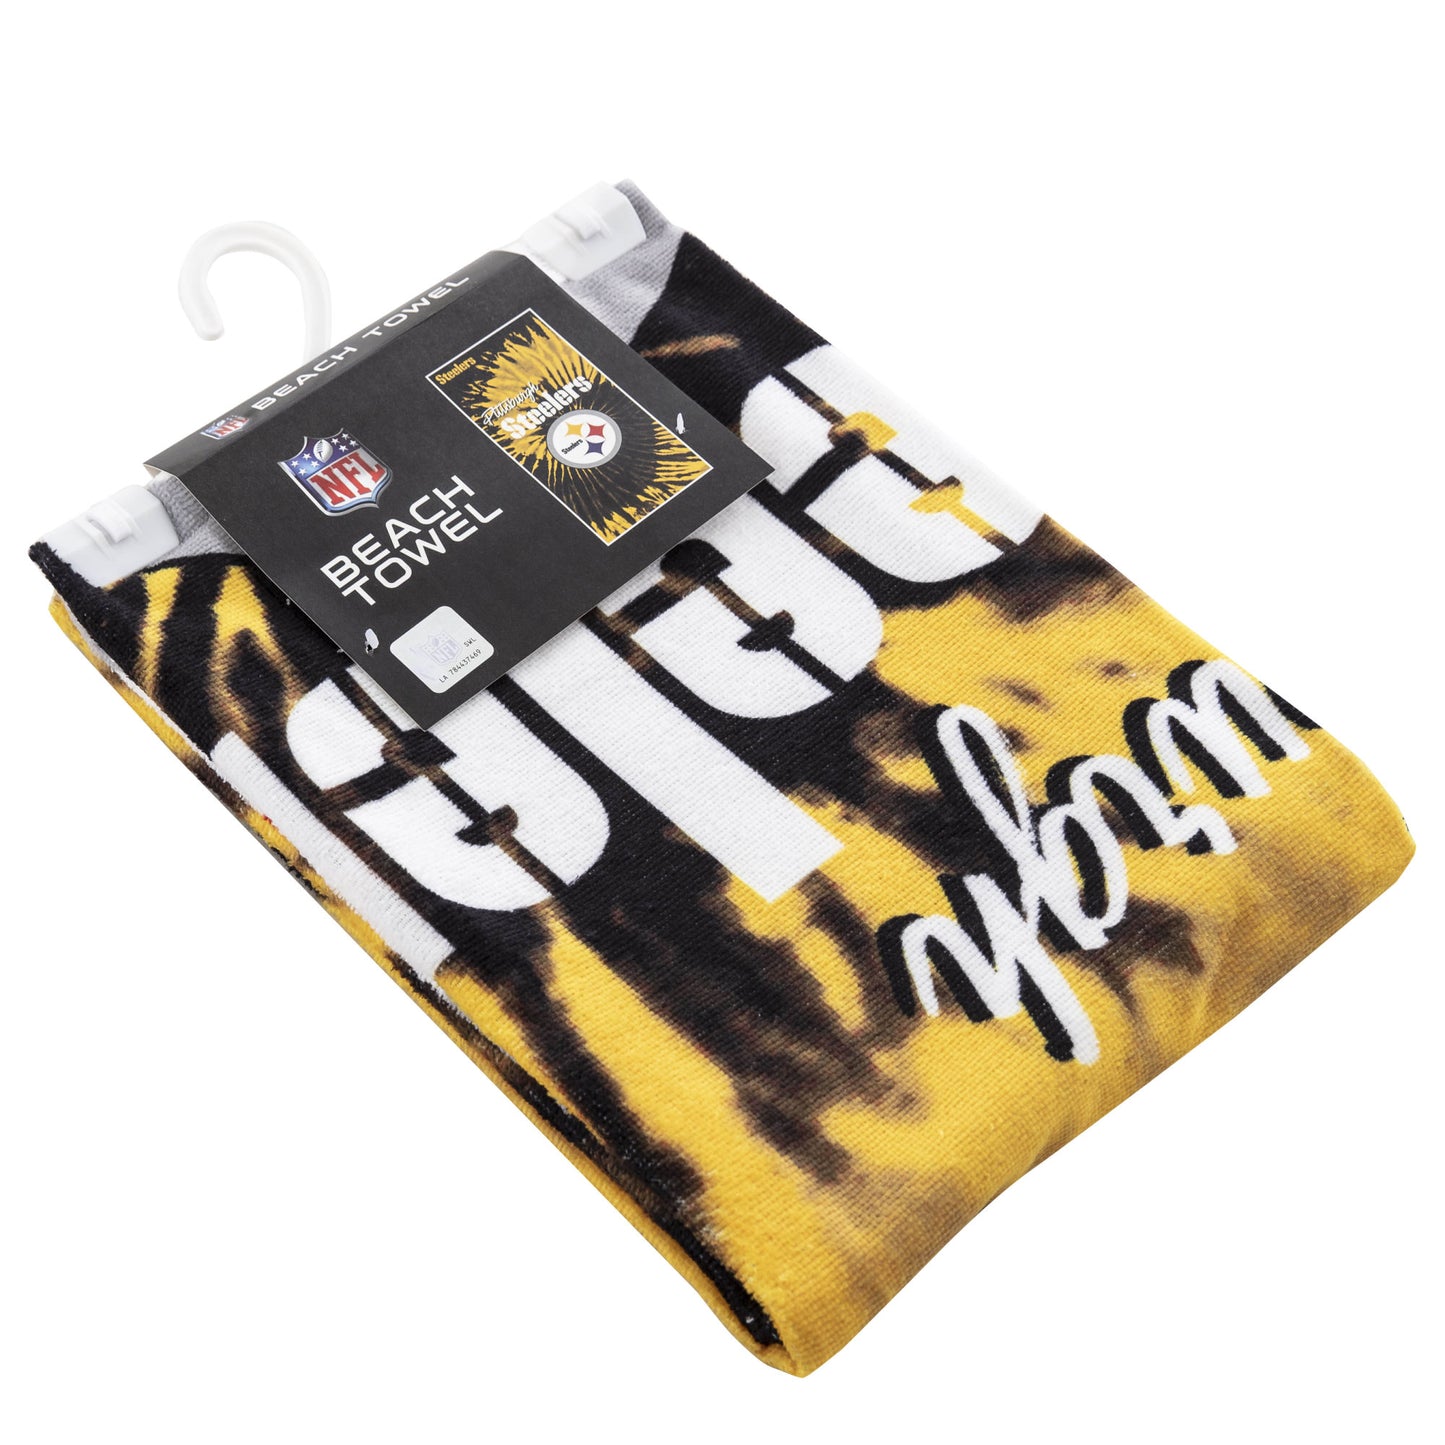 Steelers OFFICIAL NFL "Psychedelic" Beach Towel; 30" x 60"